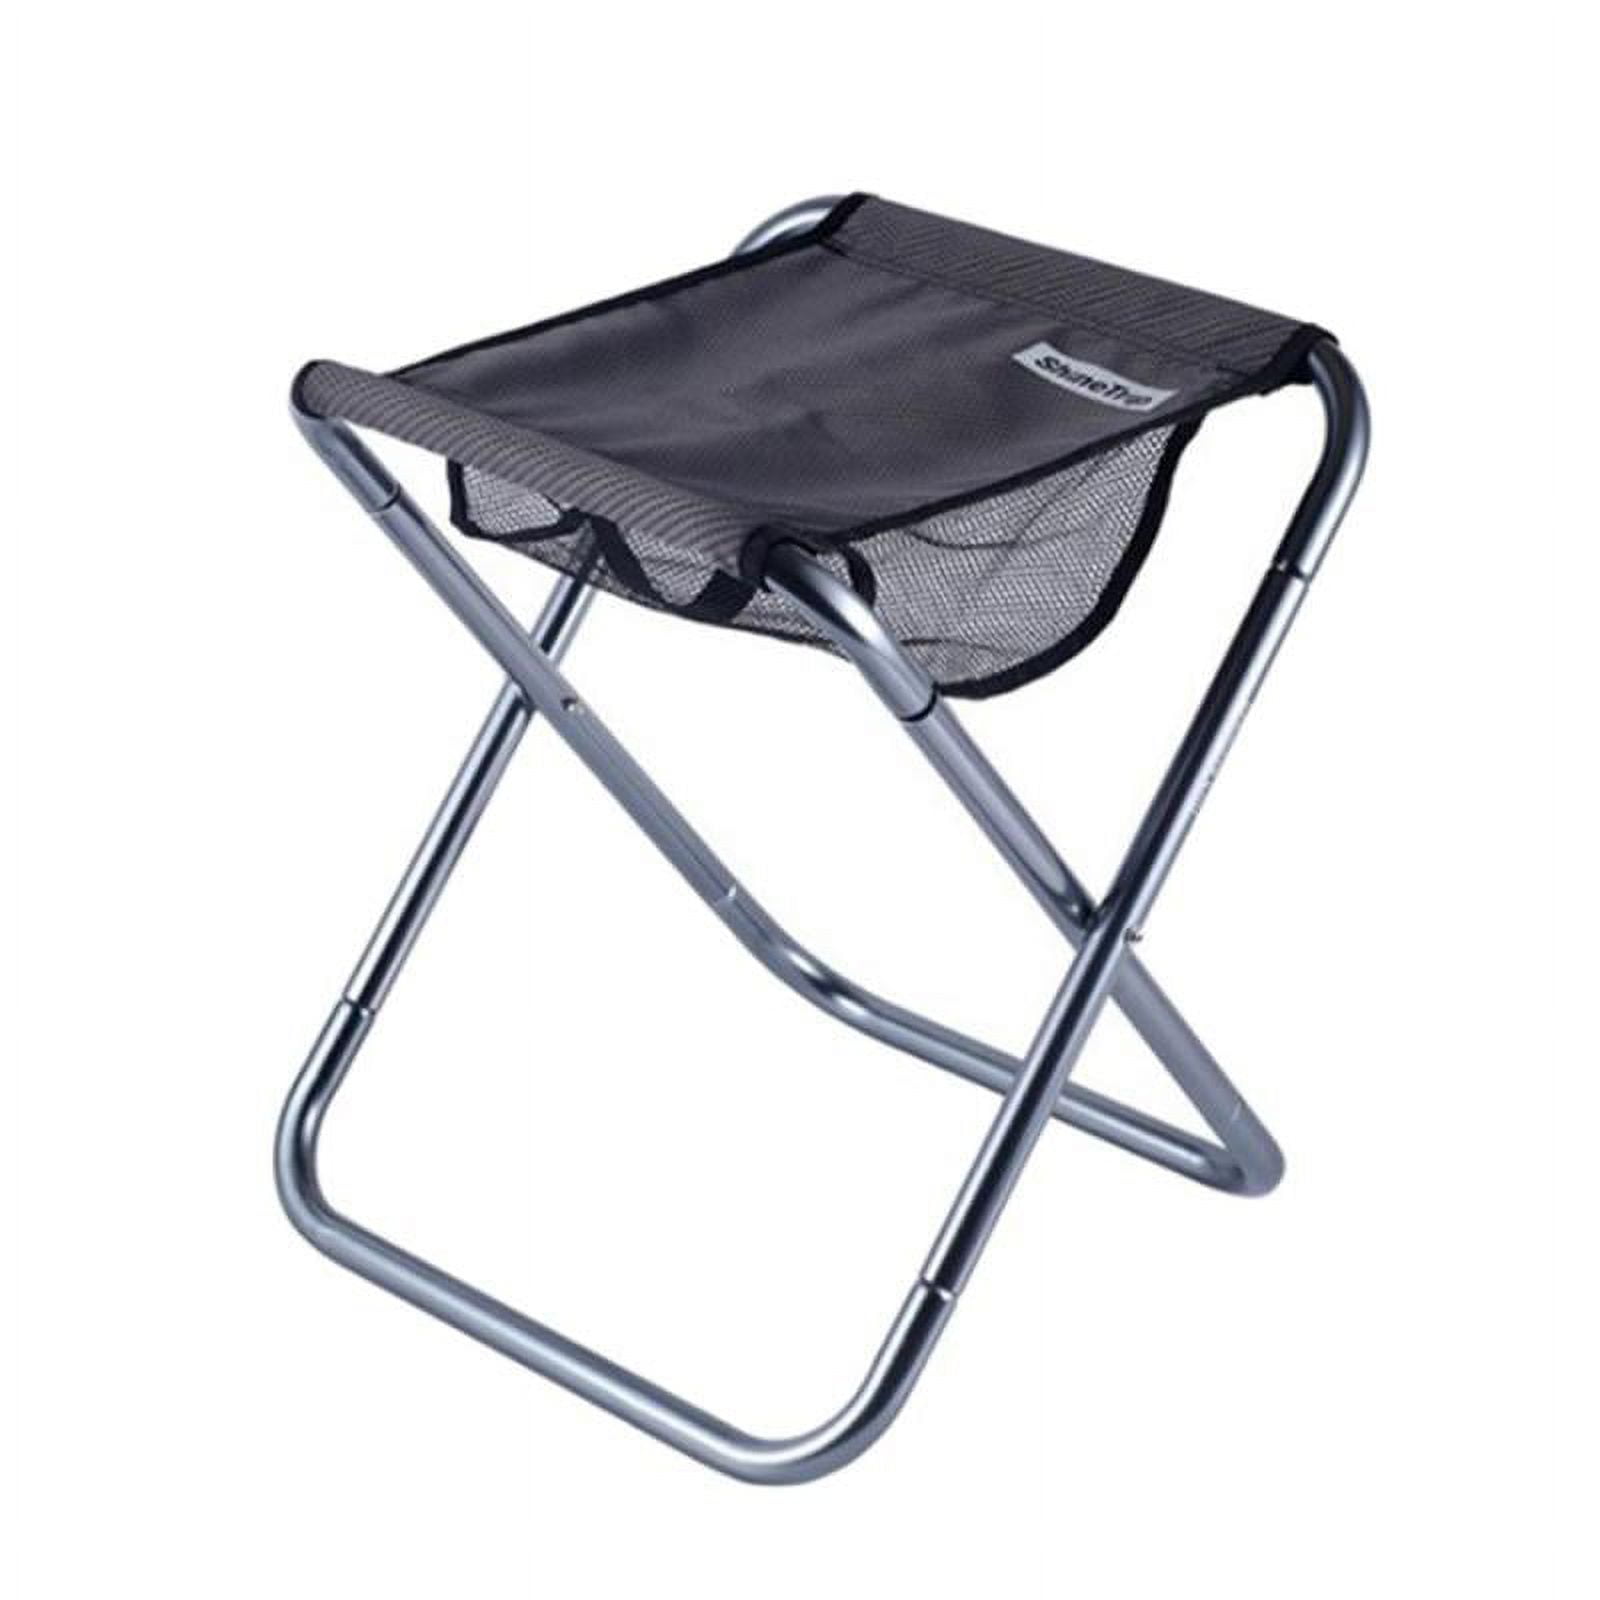 Outdoor Ultralight Folding Chair Triangle Small Stool Camping Portable Seat  600D Waterproof Hiking Picnic Tools 